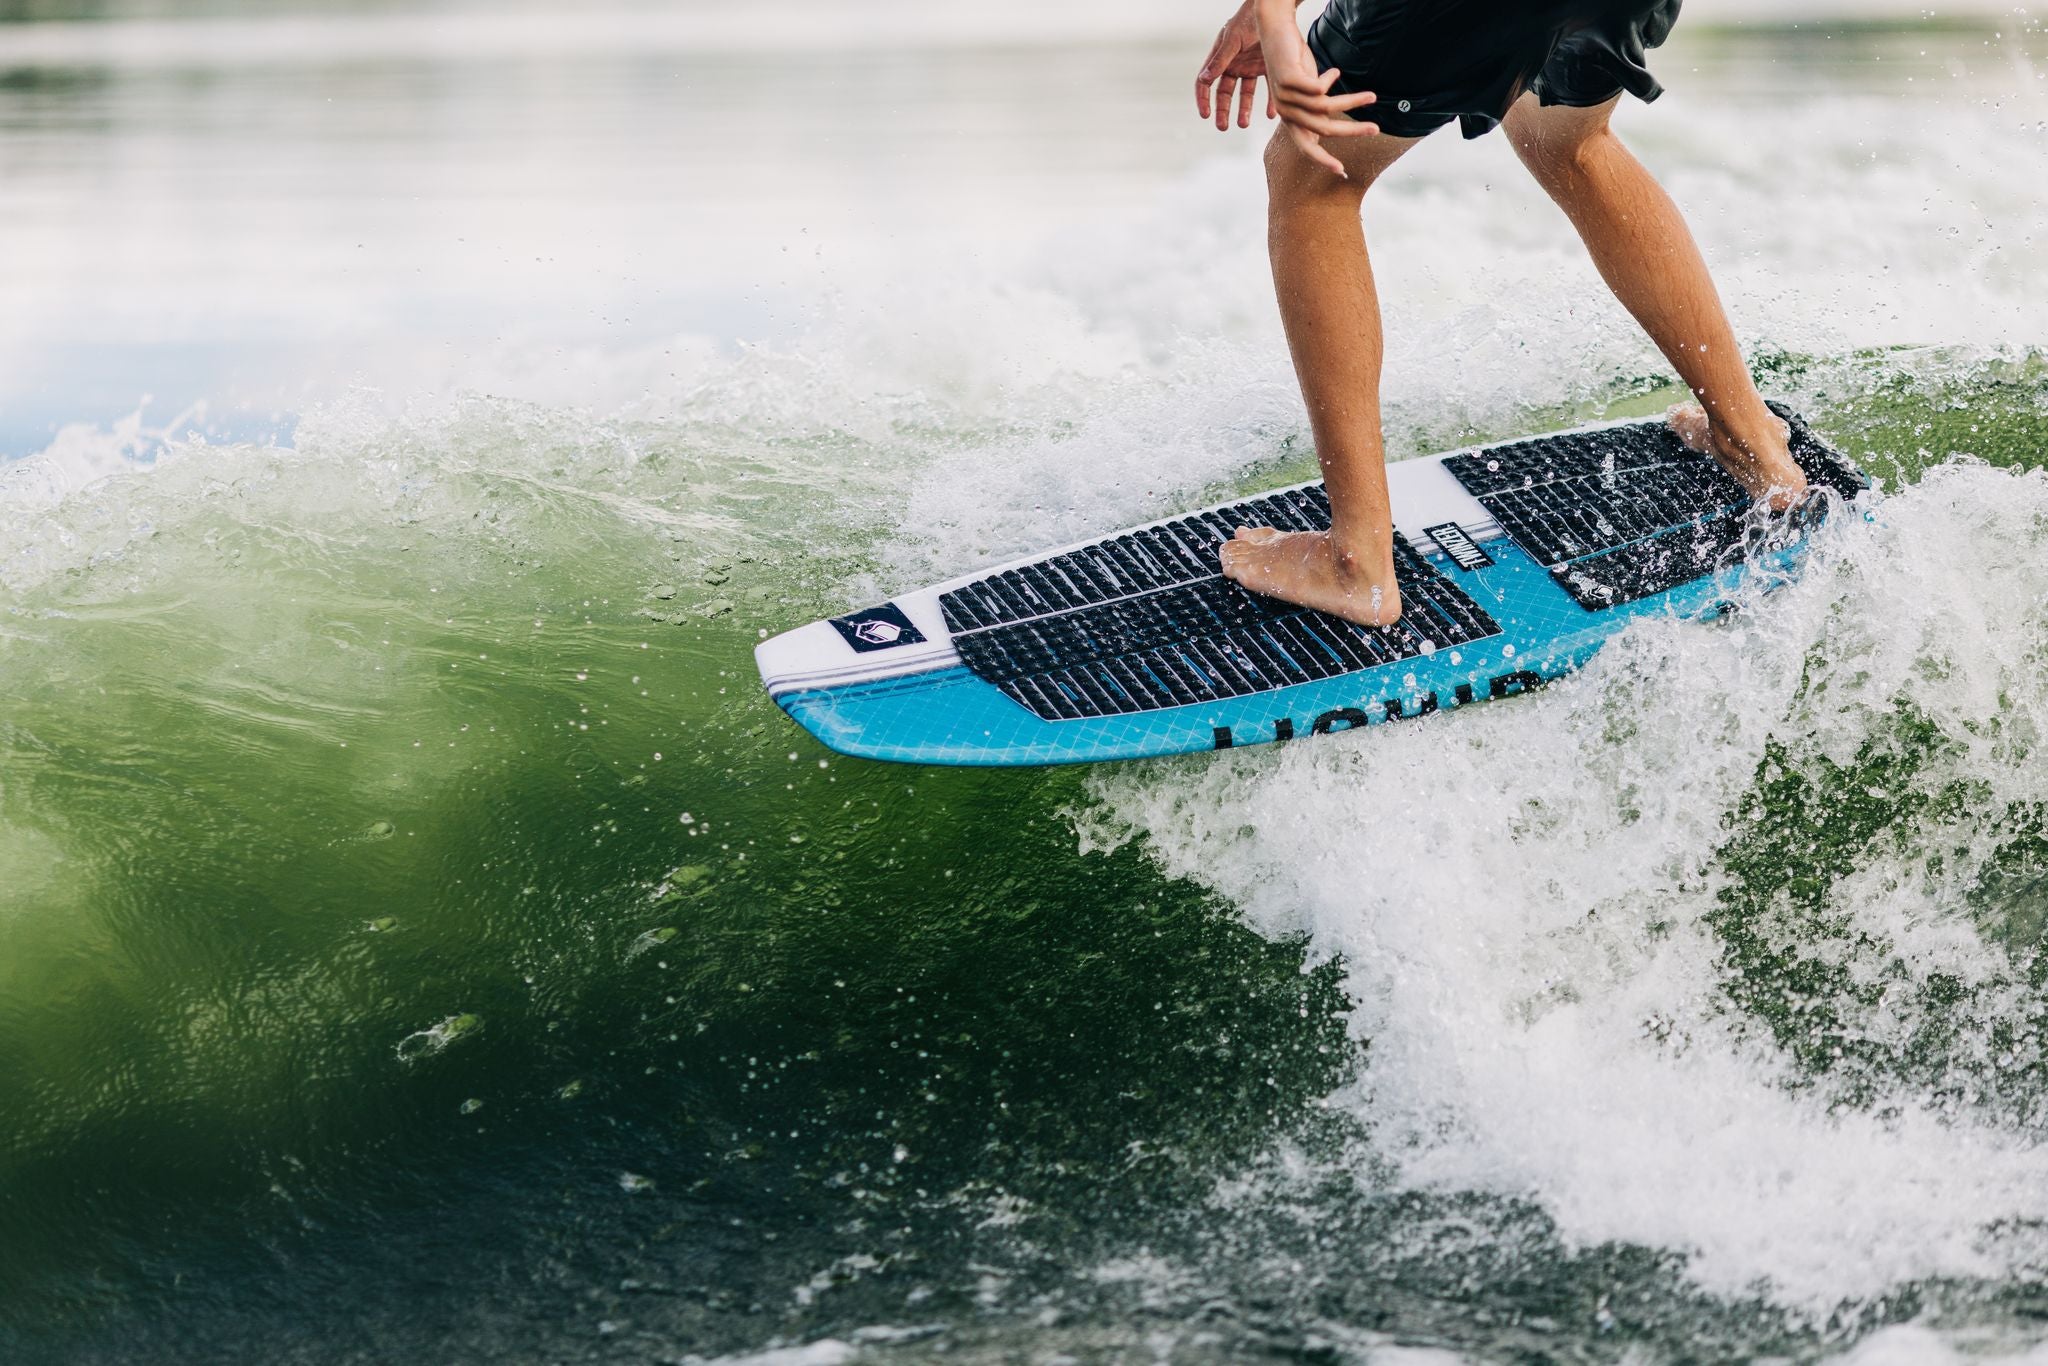 A person riding a surfboard, the Liquid Force 2024 Twinzer Wakesurf Board, with a Twinzer fin configuration on a concave wave.